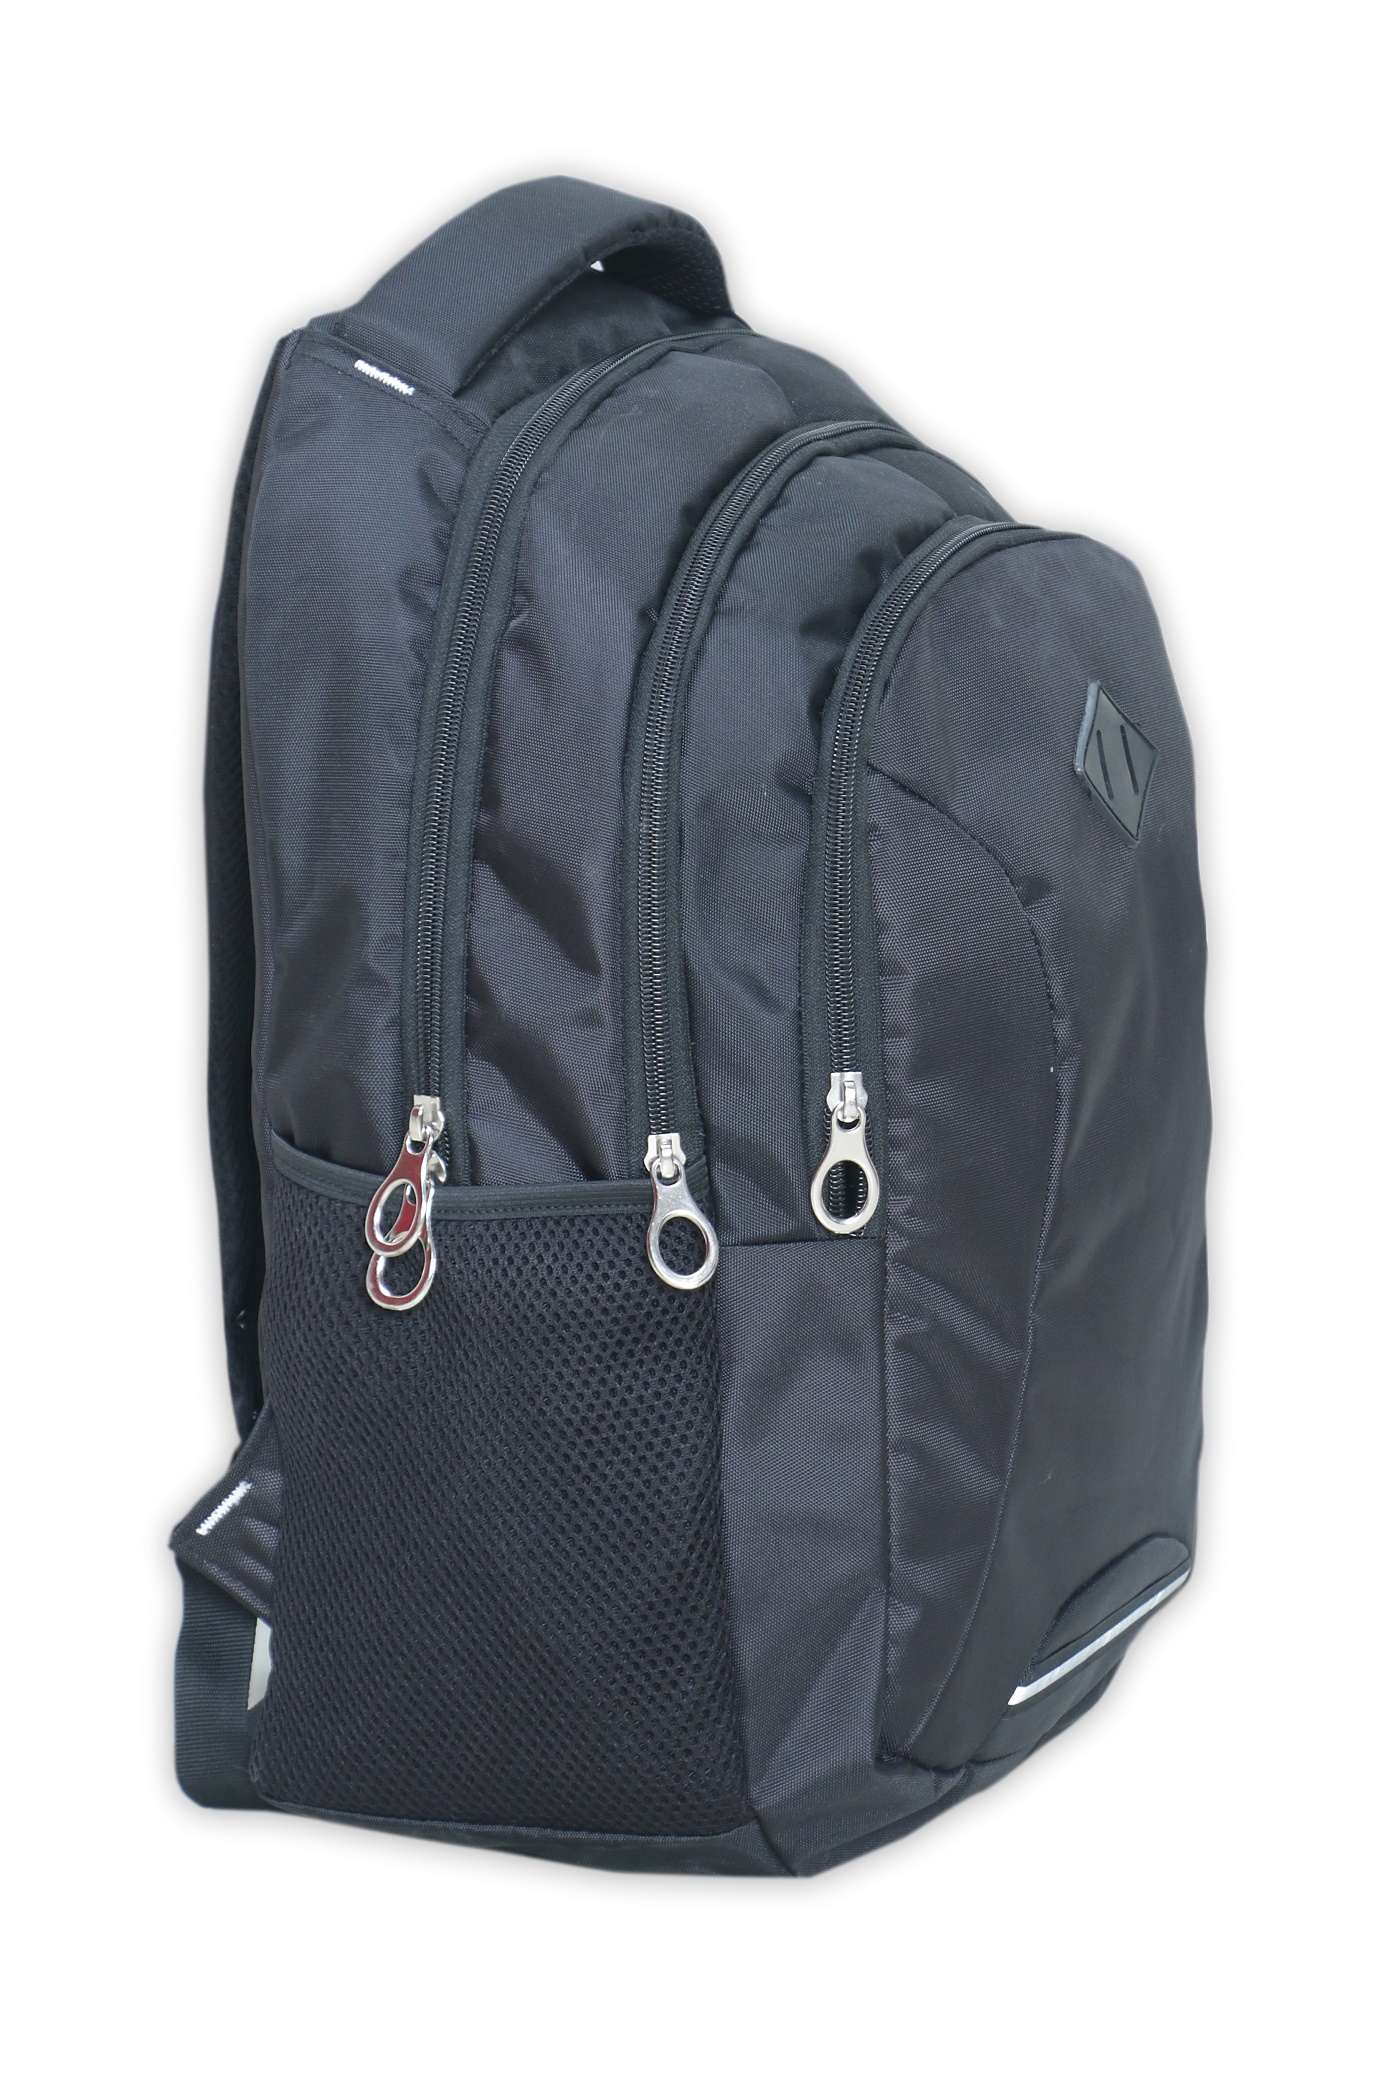 Buy Northzone All Expandable Laptop Bag And Backpack Online @ ₹595 from ...